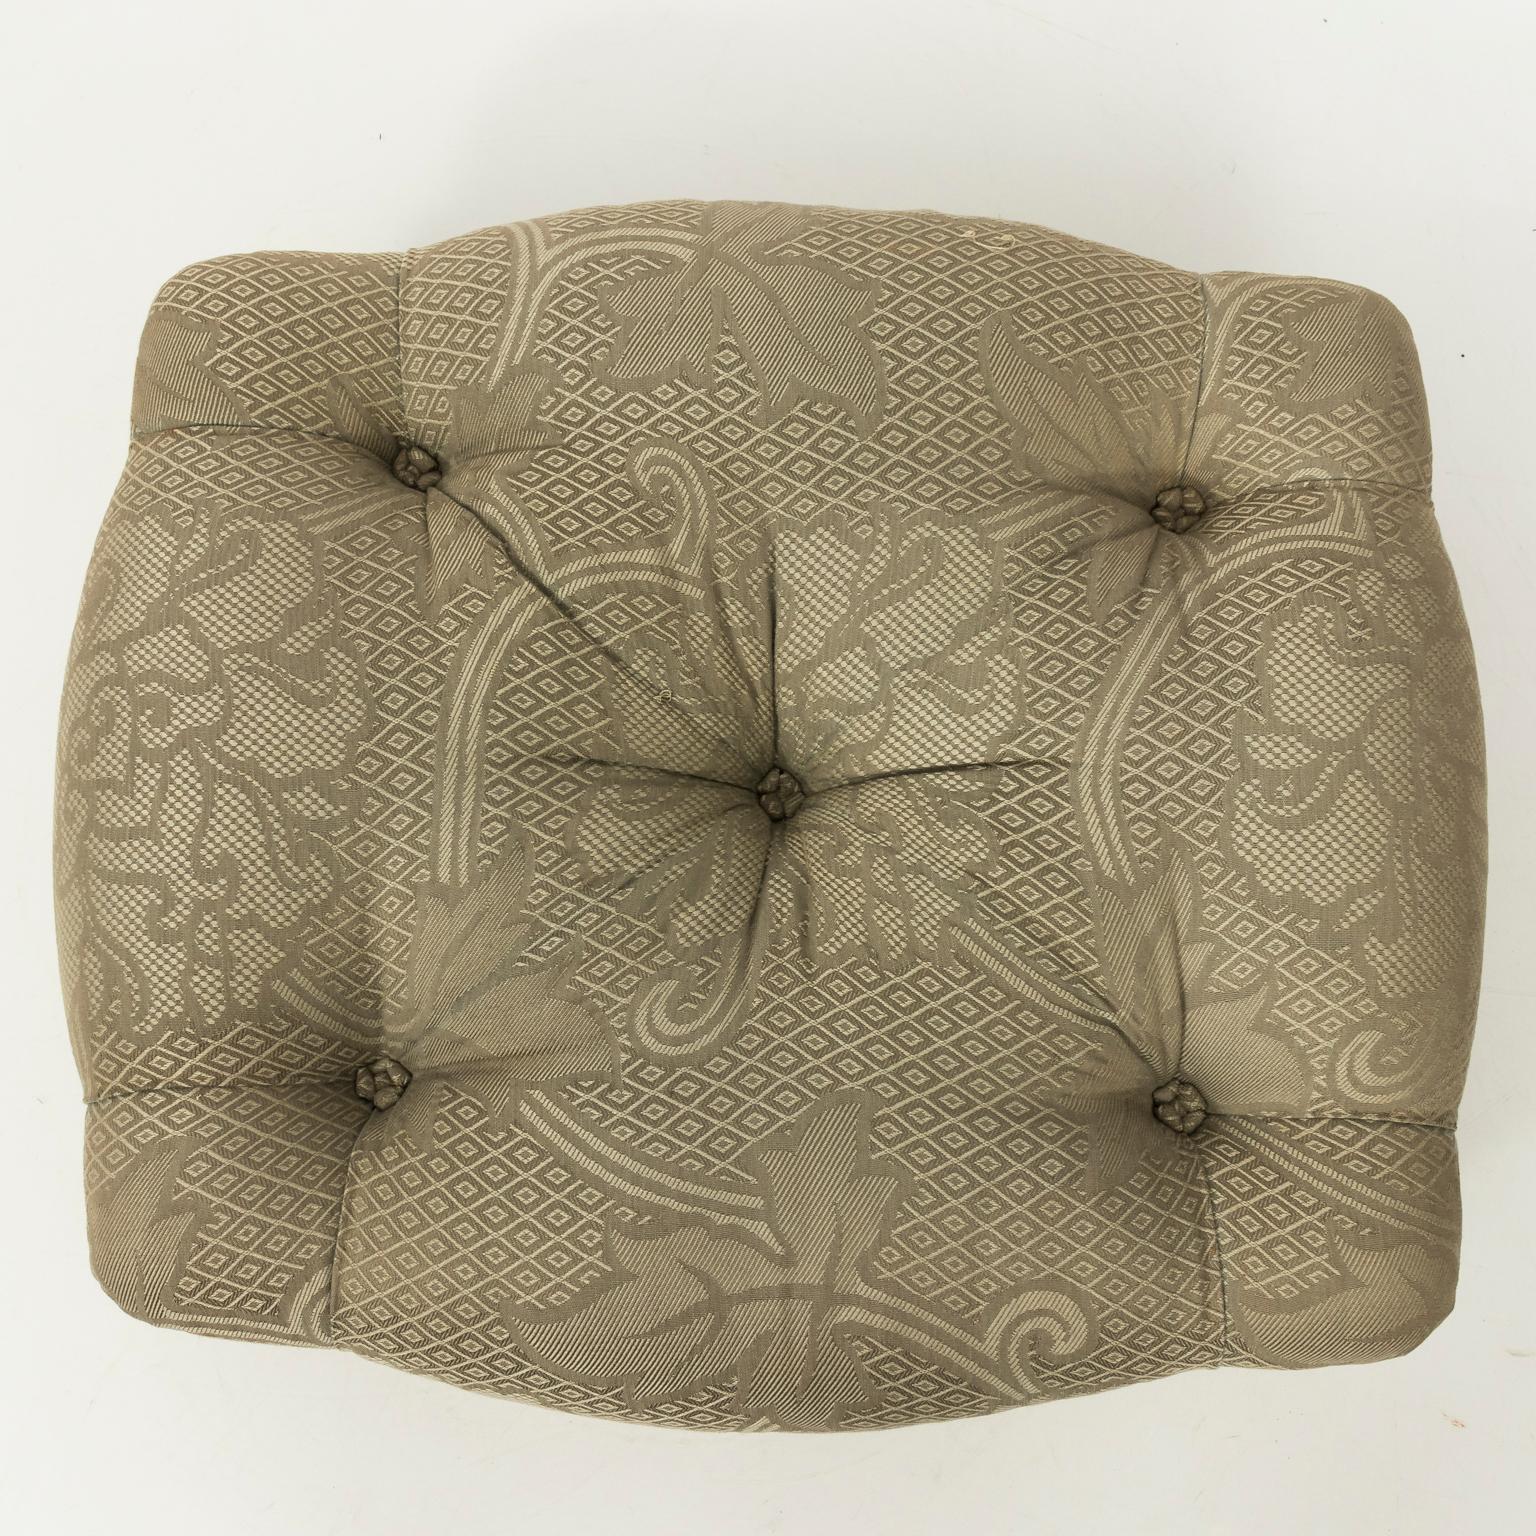 French upholstered ottoman in Celadon damask fabric with tufted buttons, circa 1920.
 